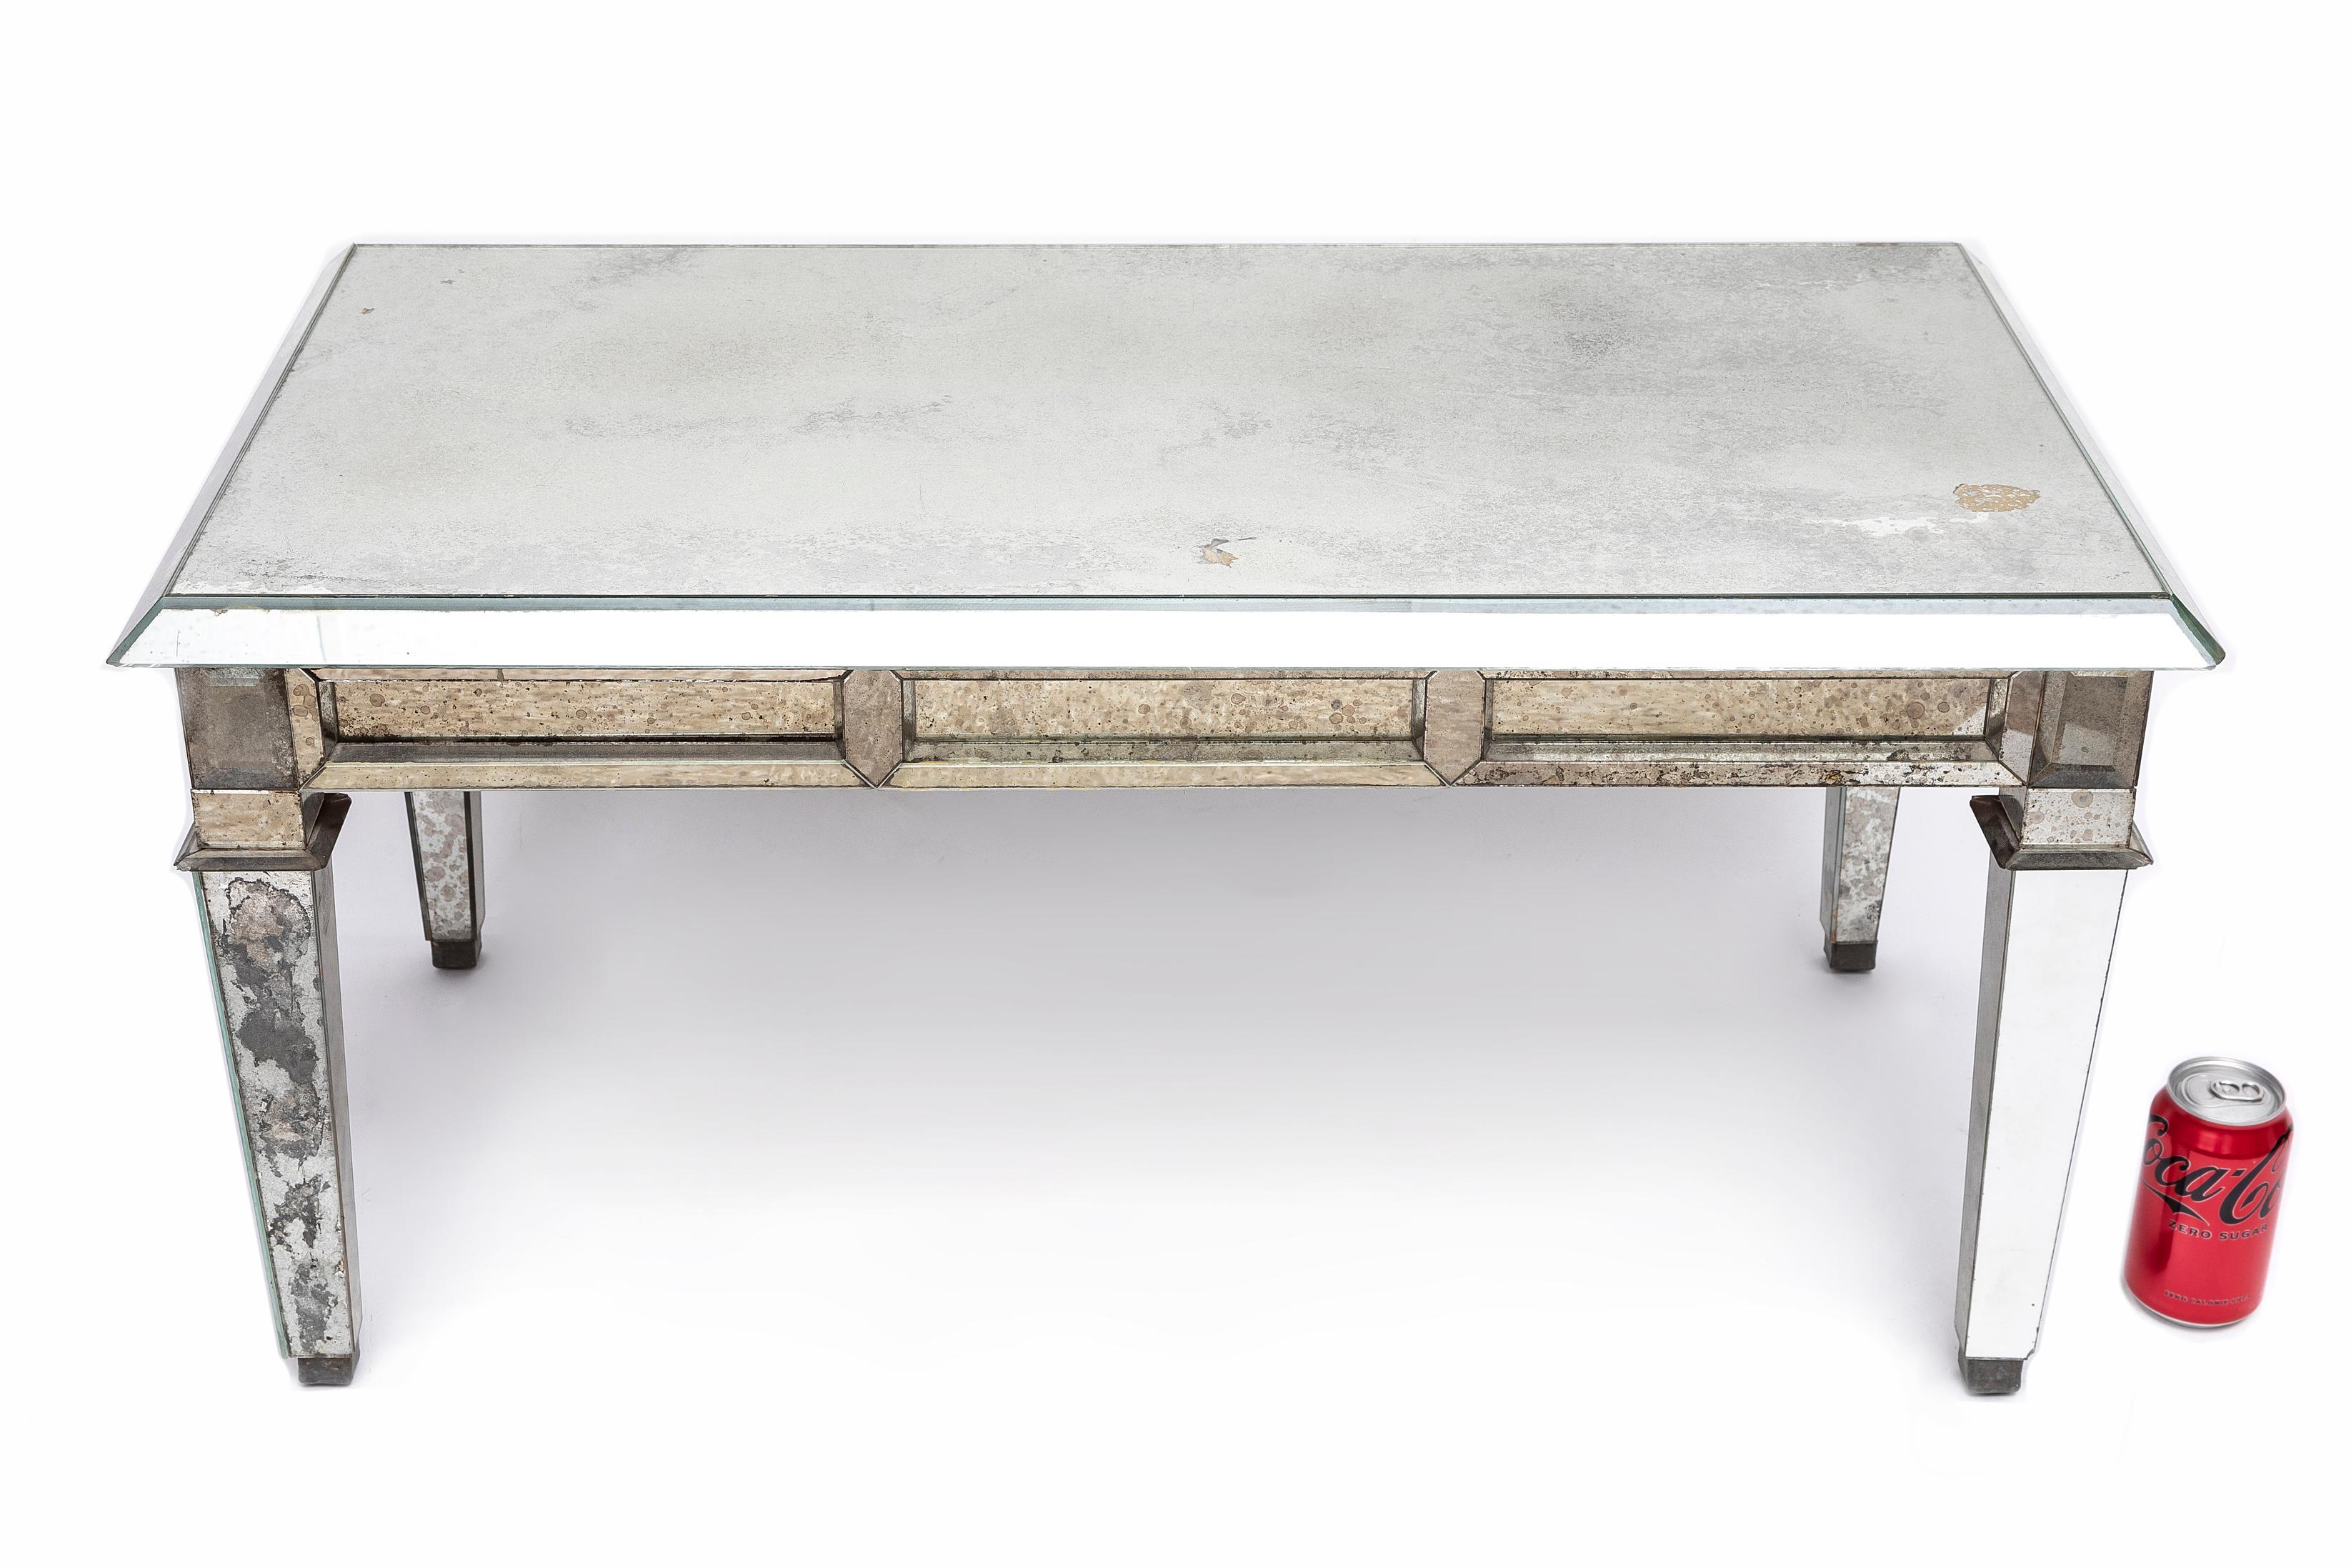 Hand-Crafted A Fabulous French Mid Century Mirrored Coffee Table, Attb. Maison Jansen